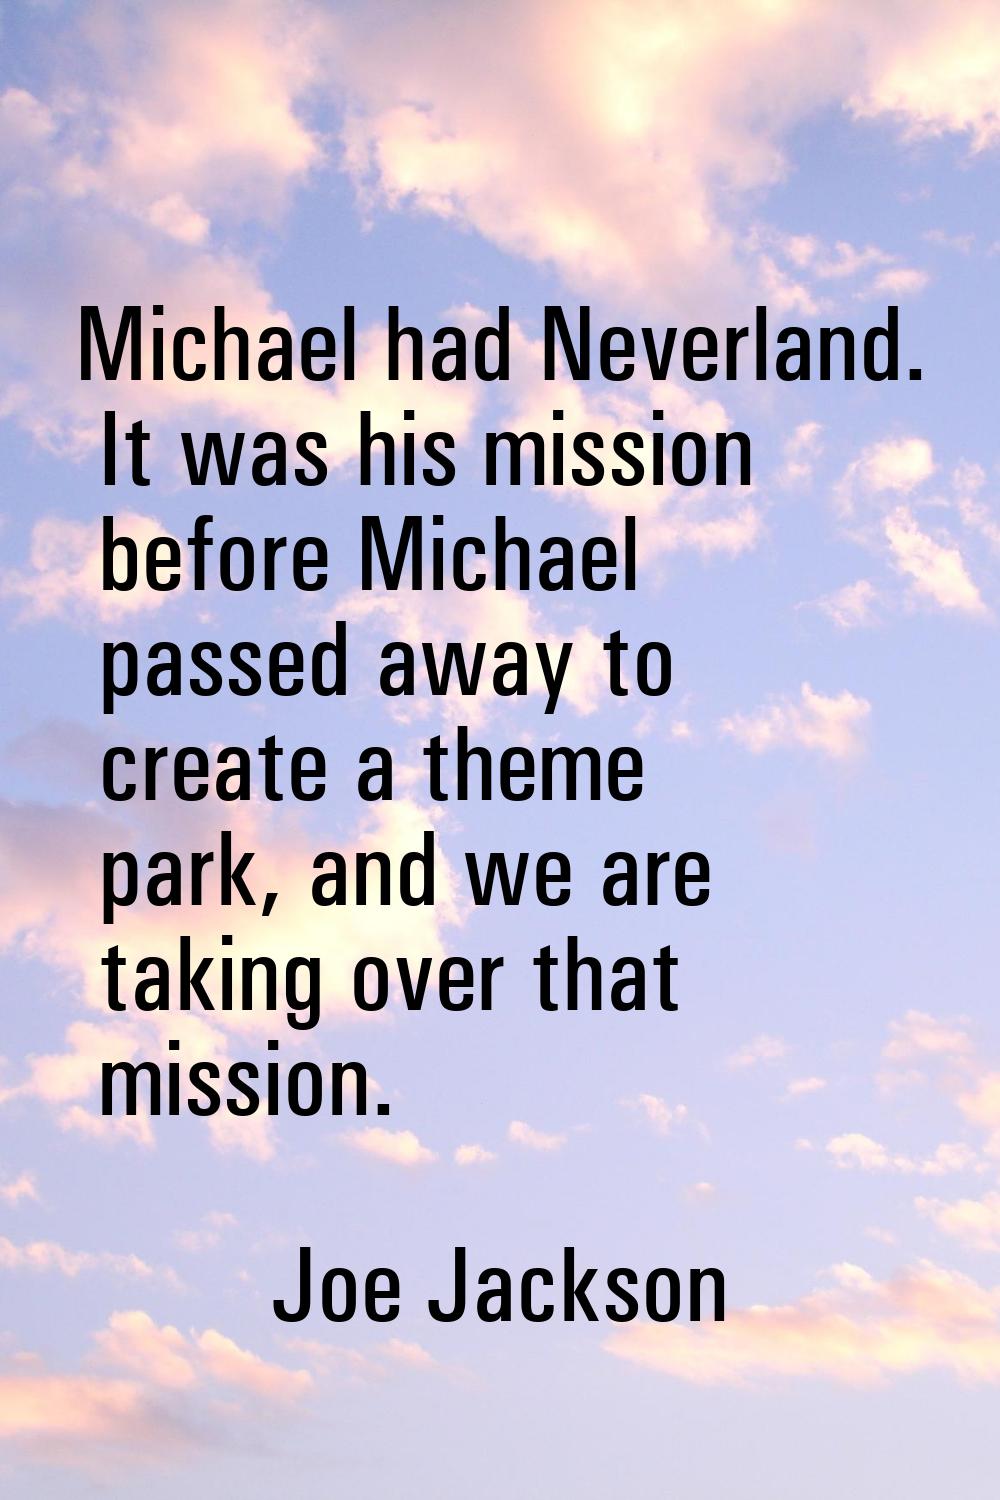 Michael had Neverland. It was his mission before Michael passed away to create a theme park, and we